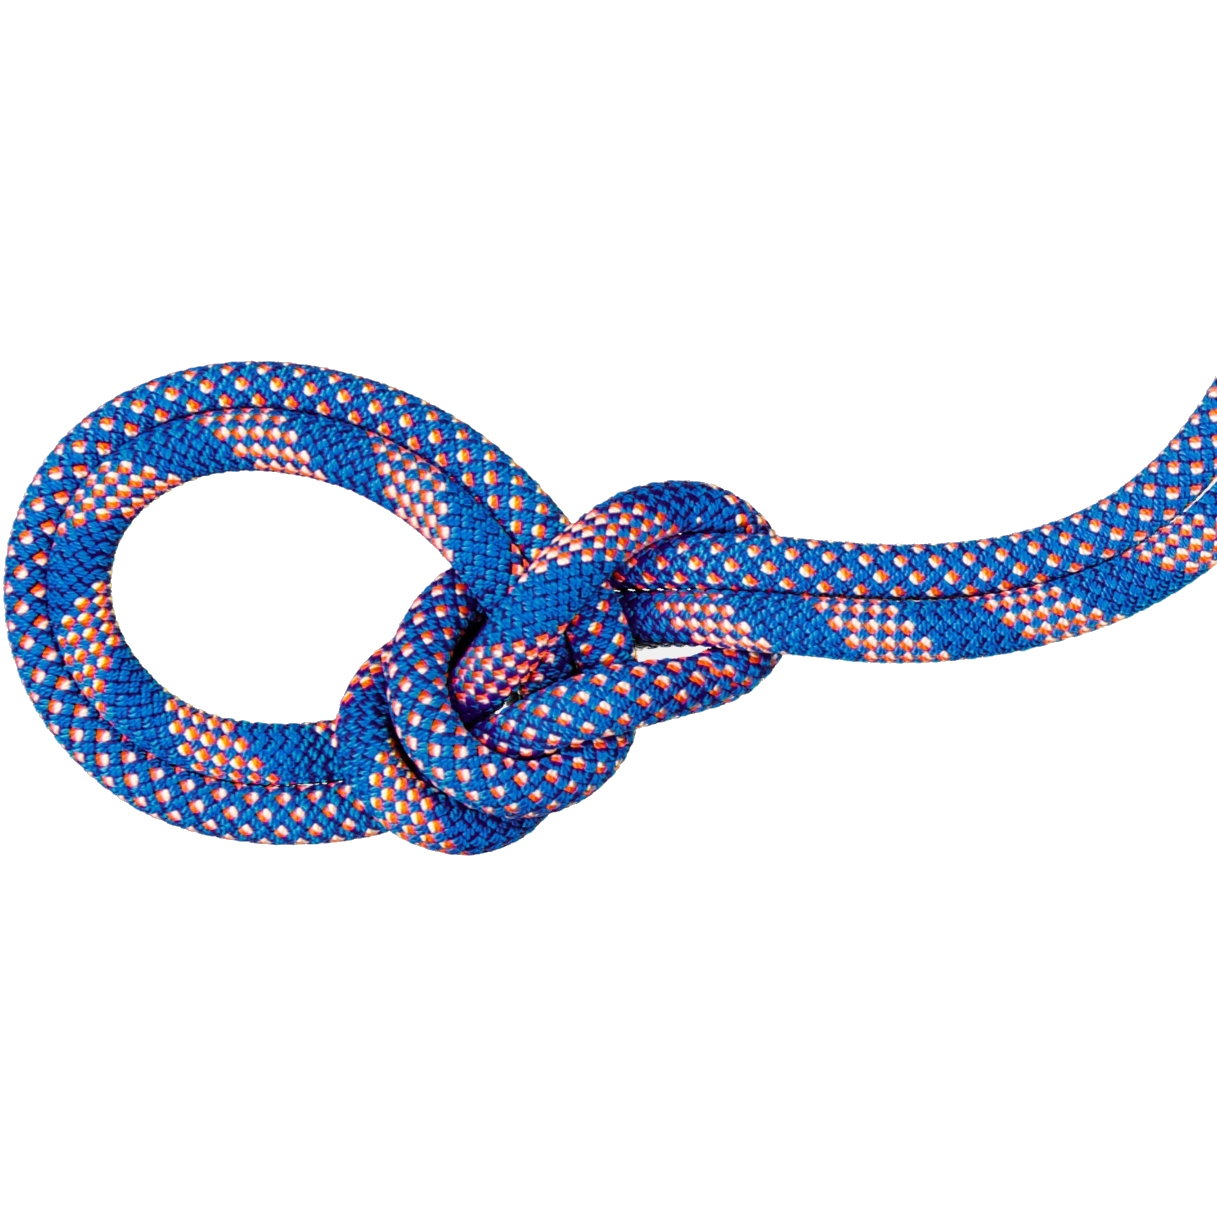 Image of Mammut 9.5 Crag Classic Rope - 60m - duodess - carribean blue-white